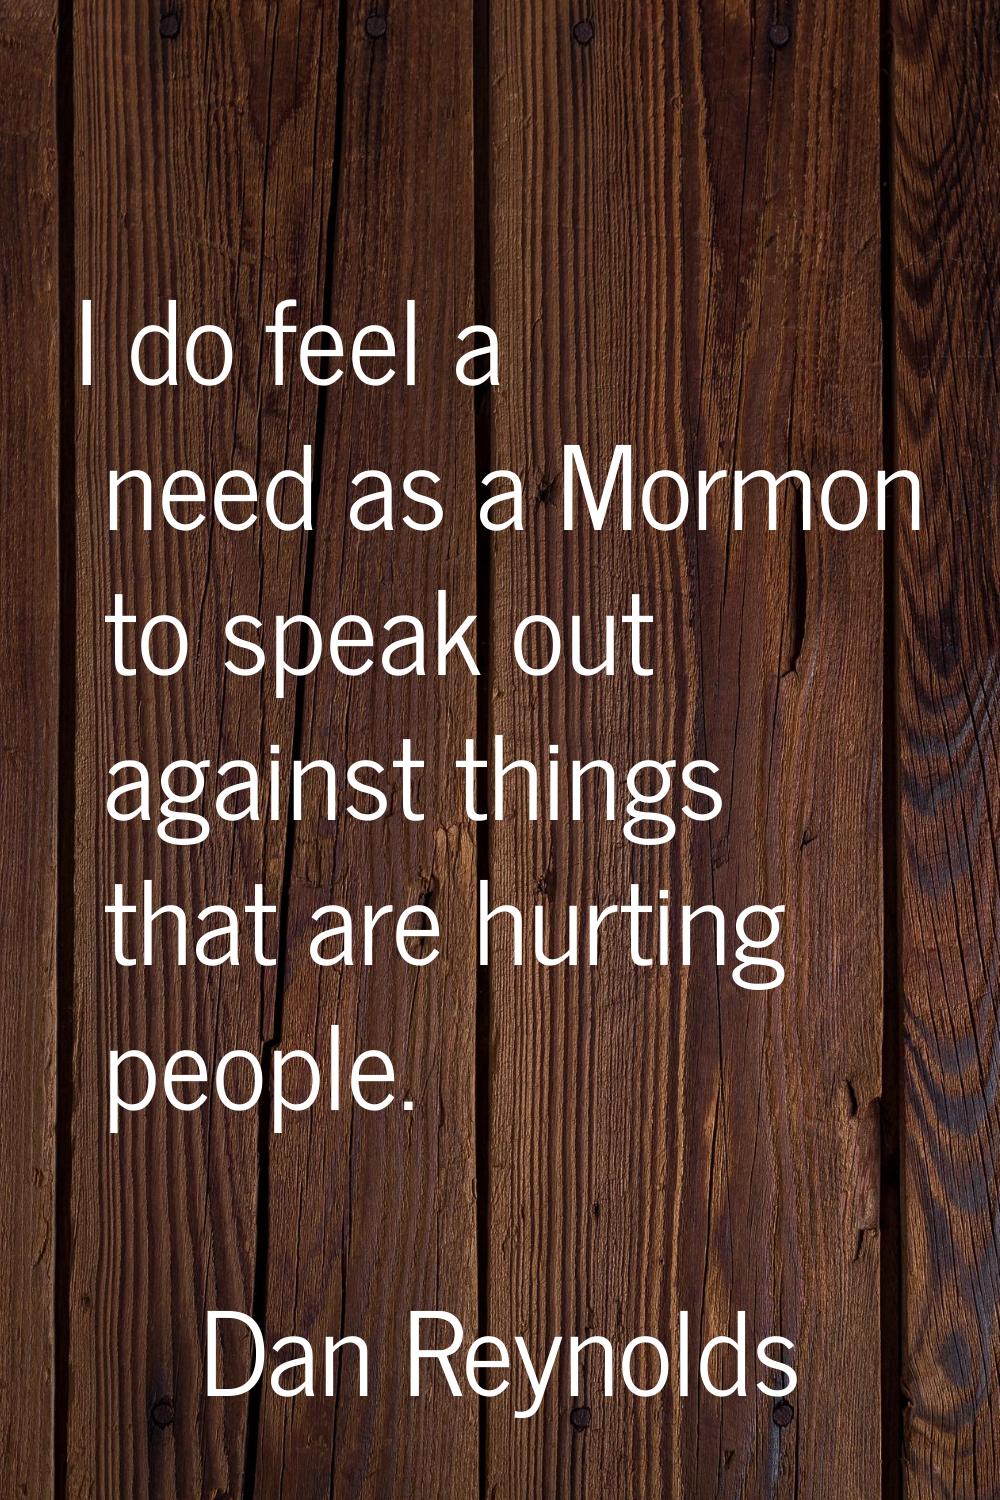 I do feel a need as a Mormon to speak out against things that are hurting people.